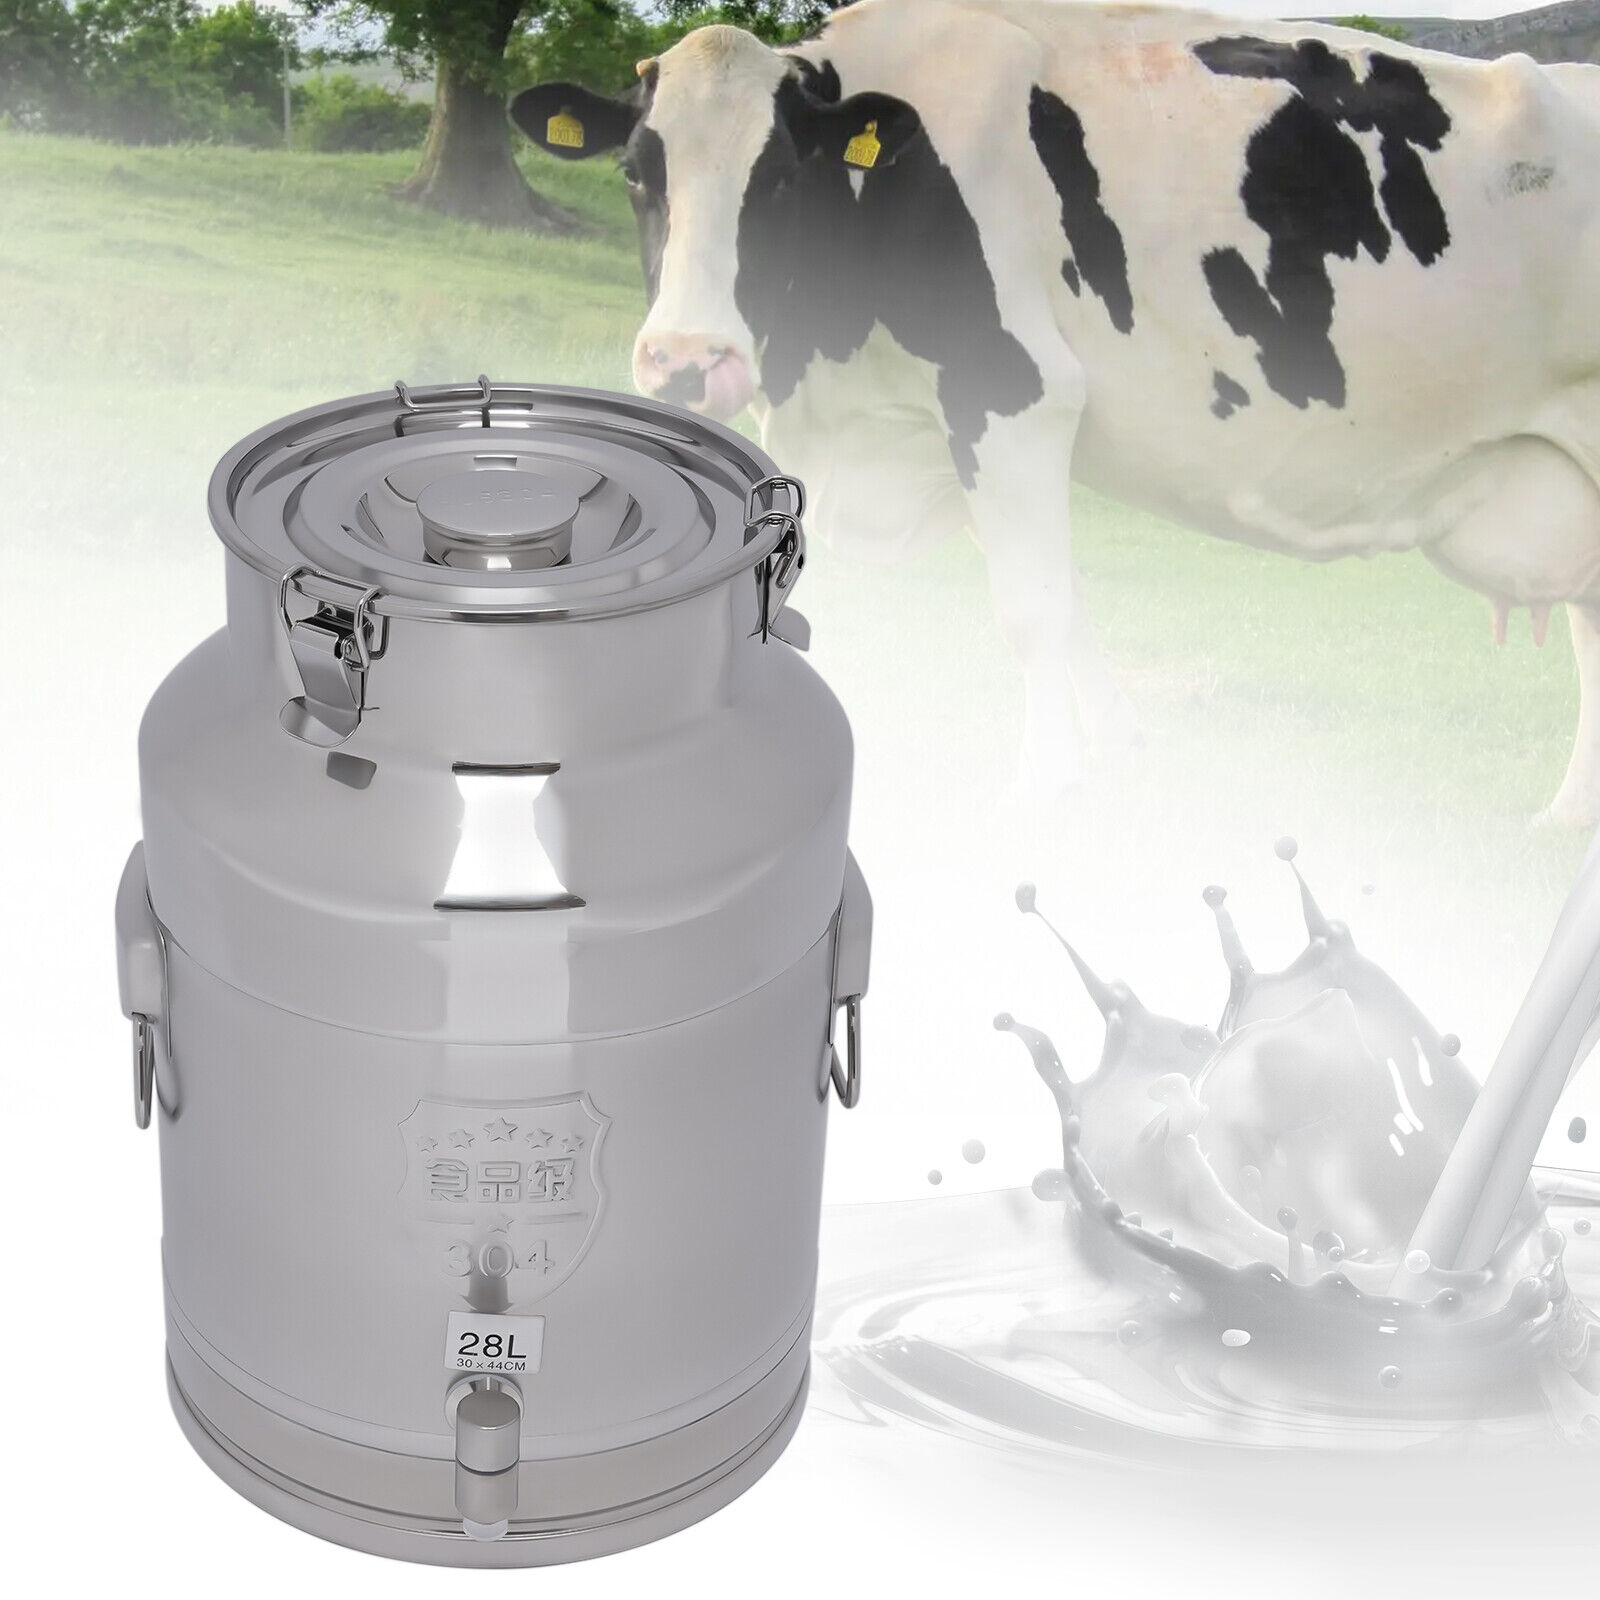 28L Stainless Steel Milk Can Wine Barrel Bucket Milk Storage Container w/ Faucet